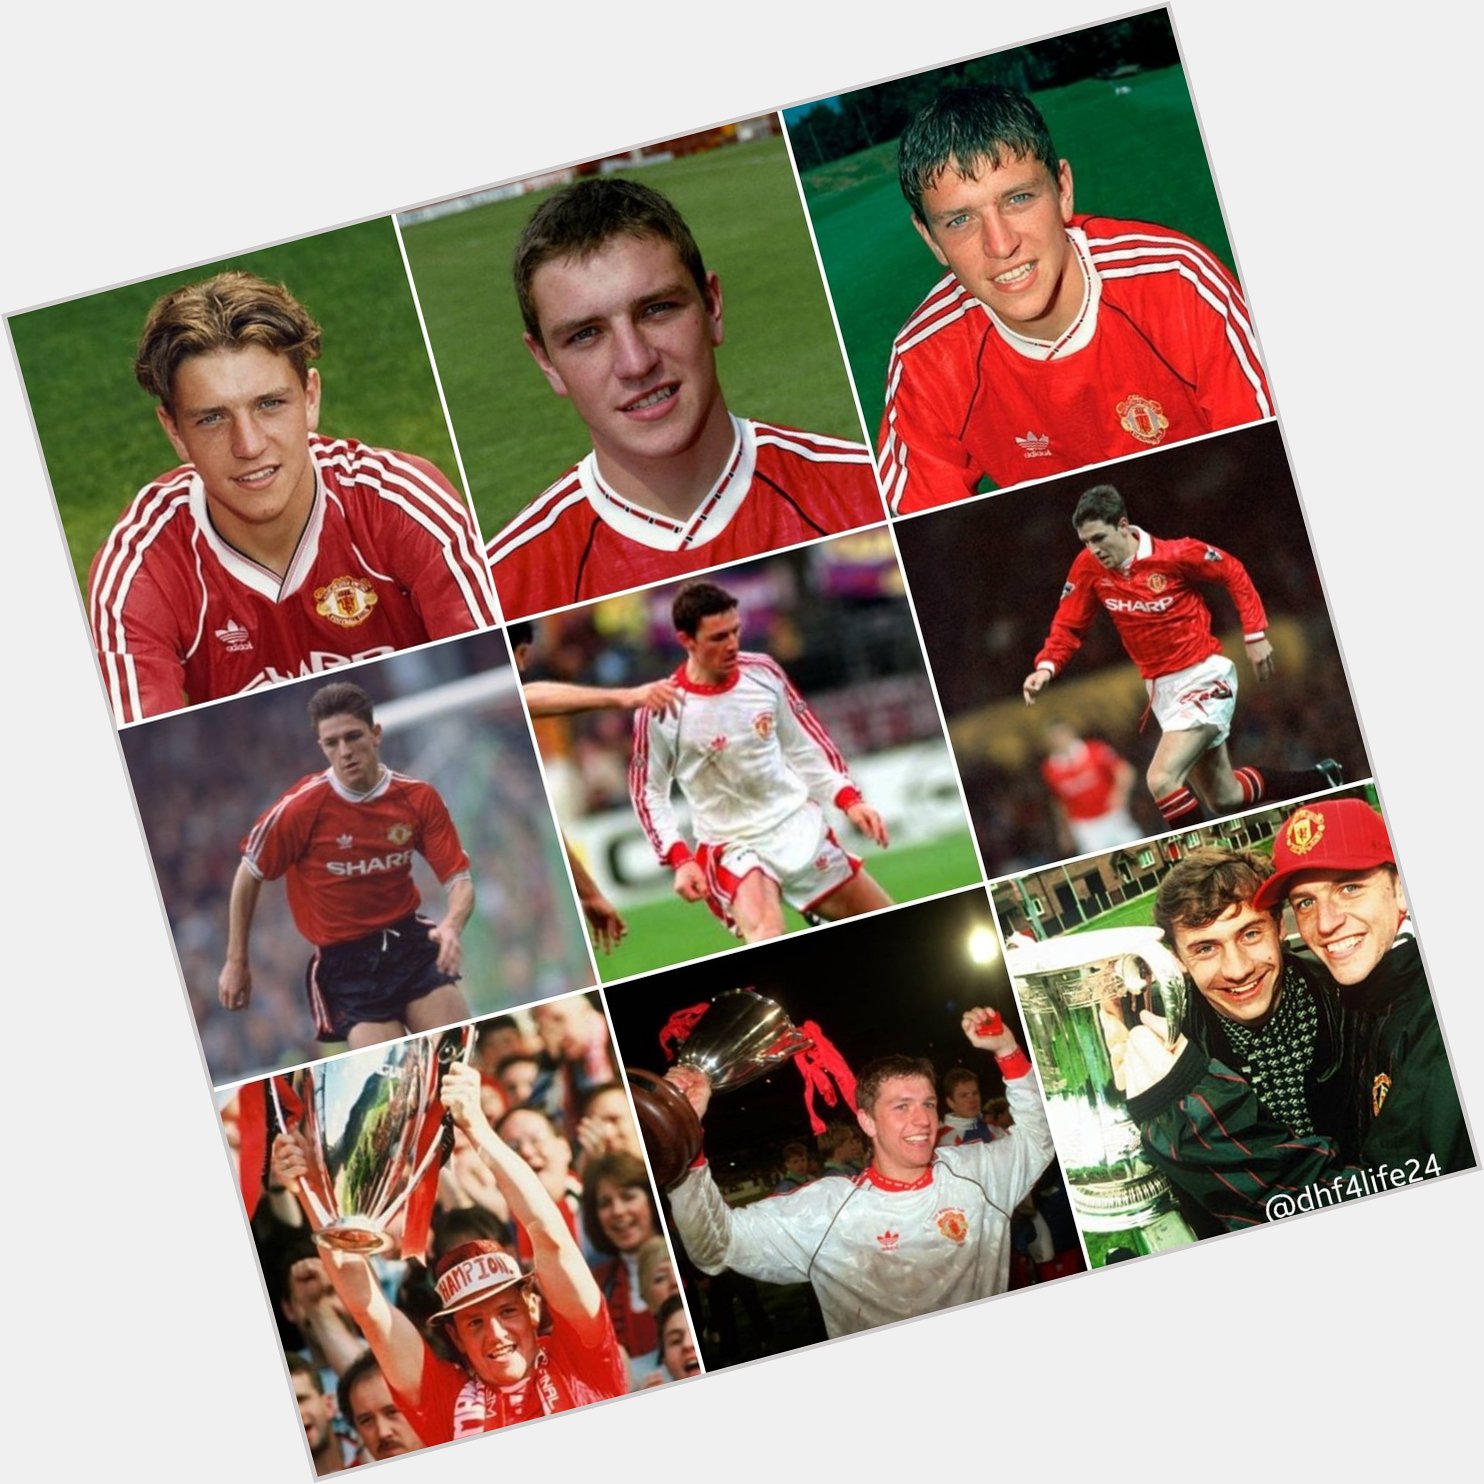 Happy 51st Birthday   on 27th May 2022 to Lee Sharpe - What a Player and LEGEND... 